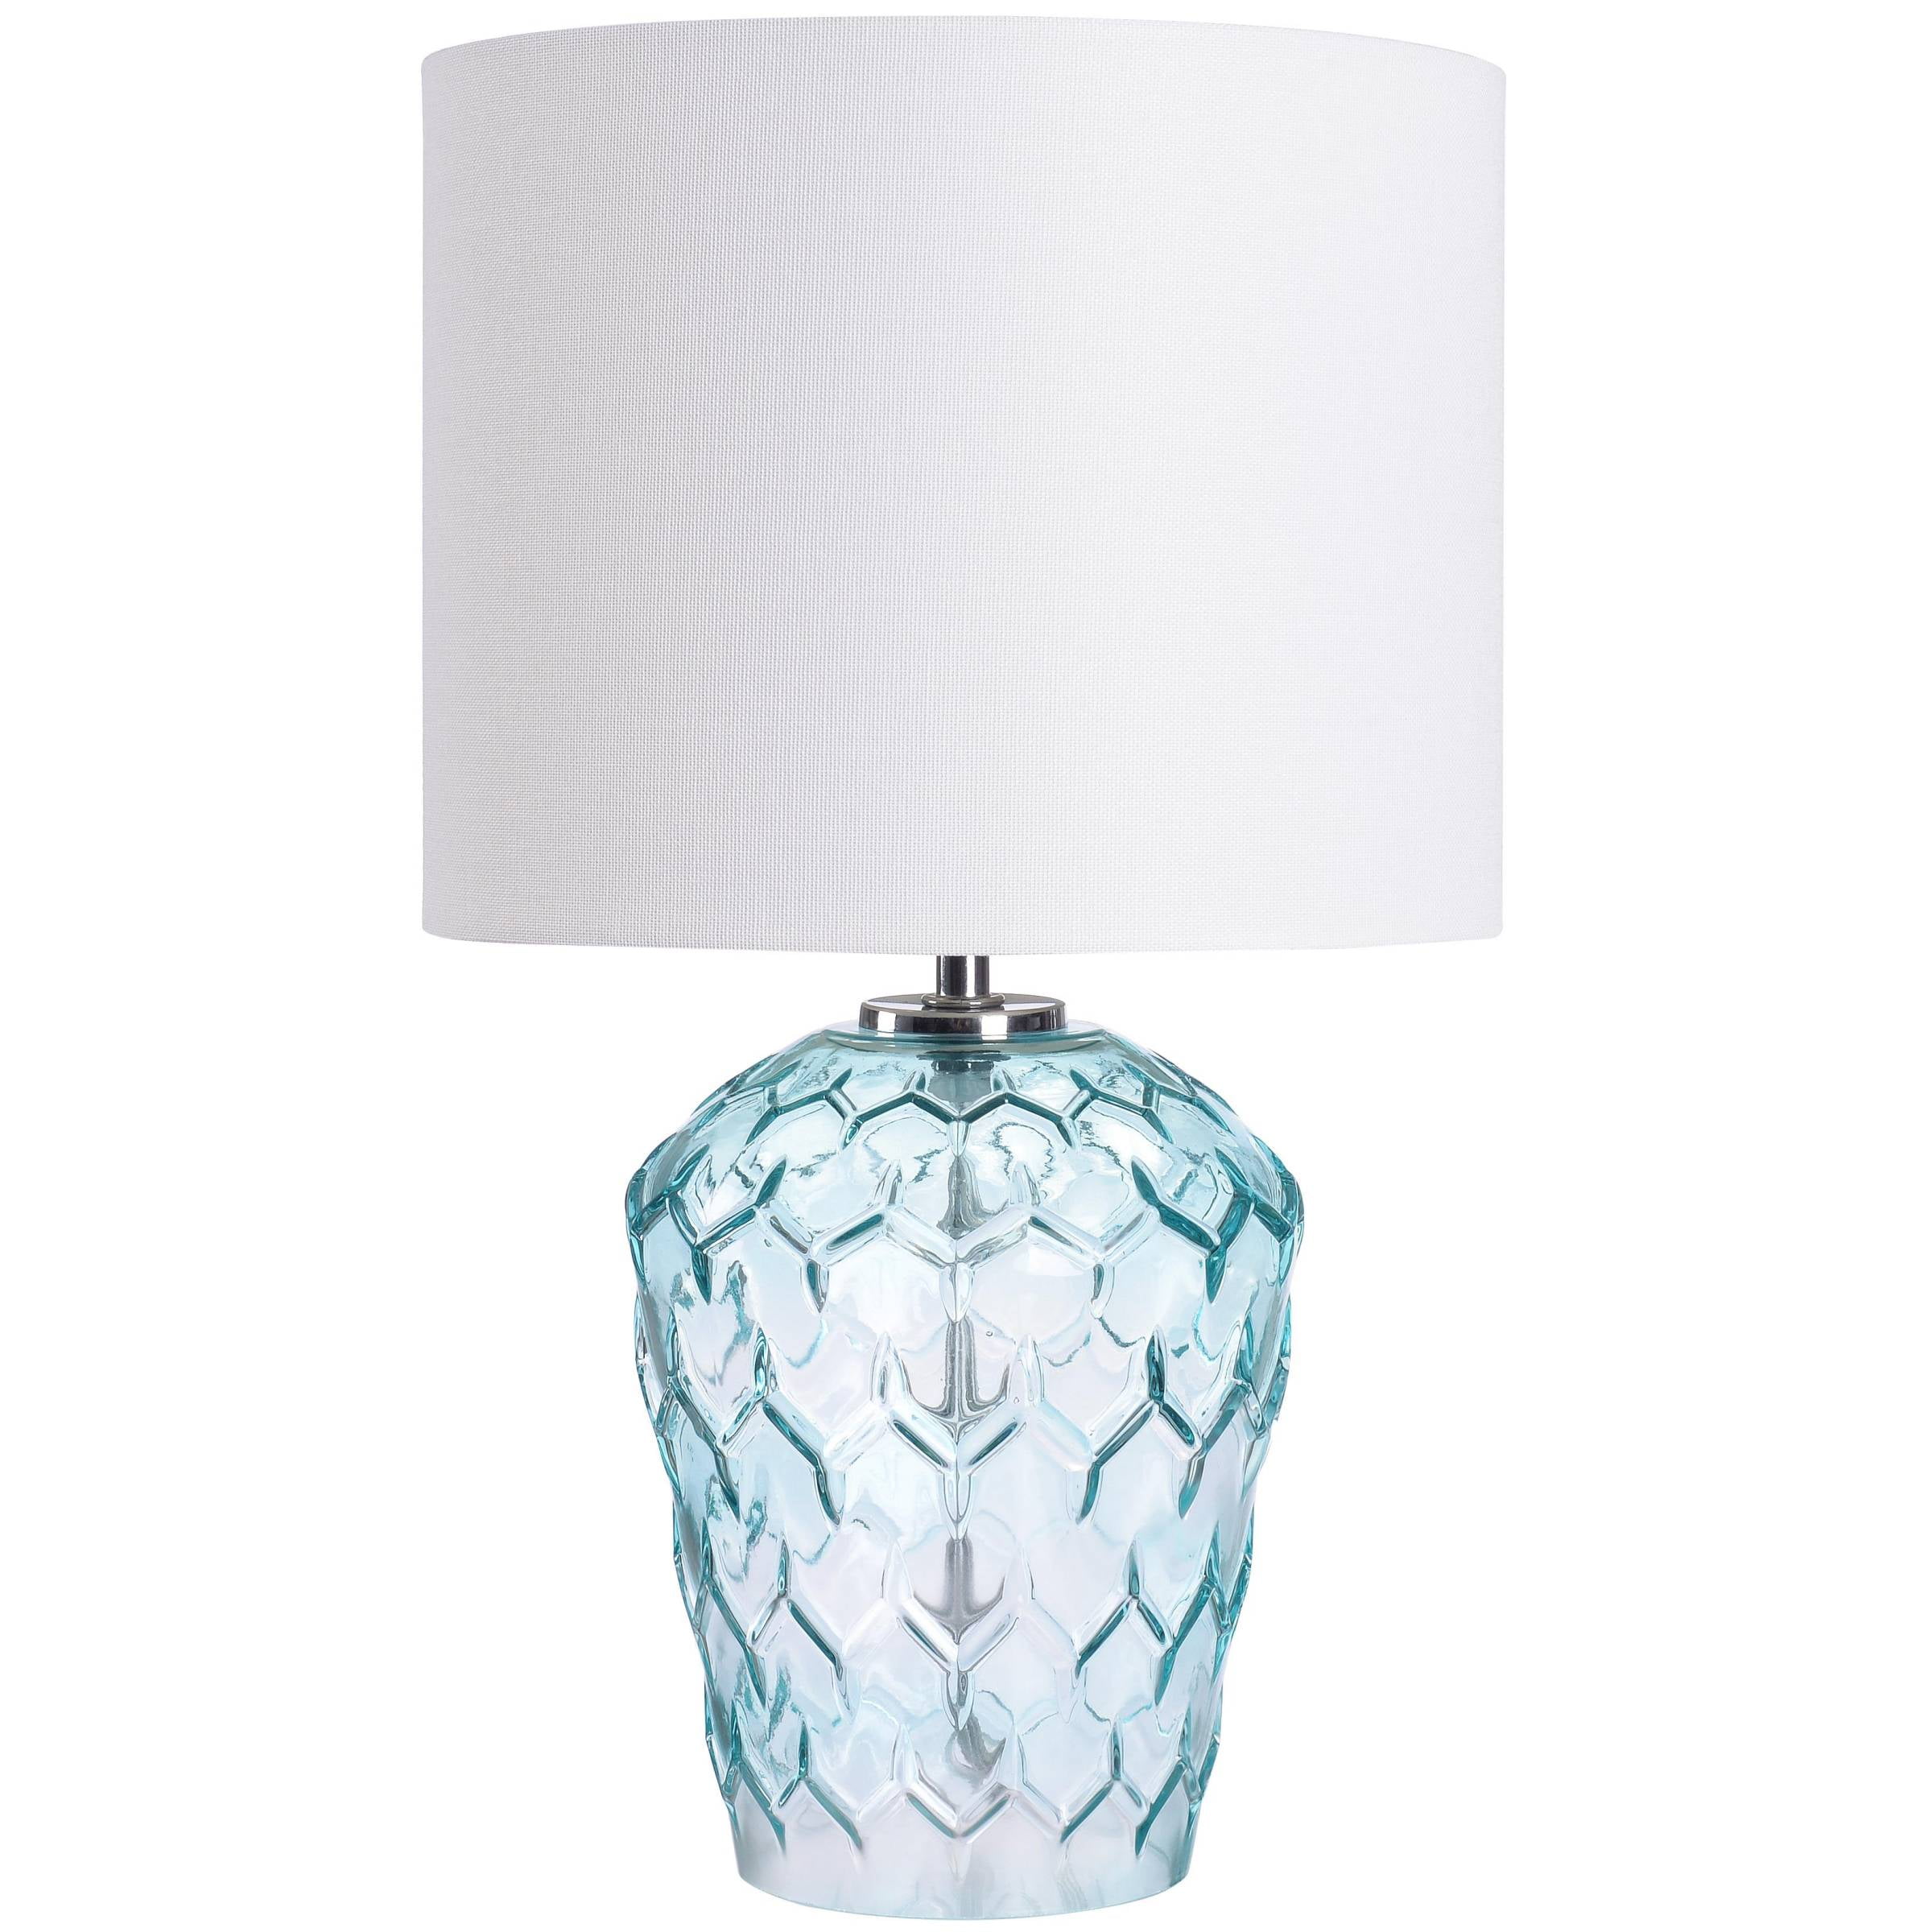 Mainstays Table Lamp with Shade 16.5"H-Aqua Color, Geo Glass Texture with Modern Style